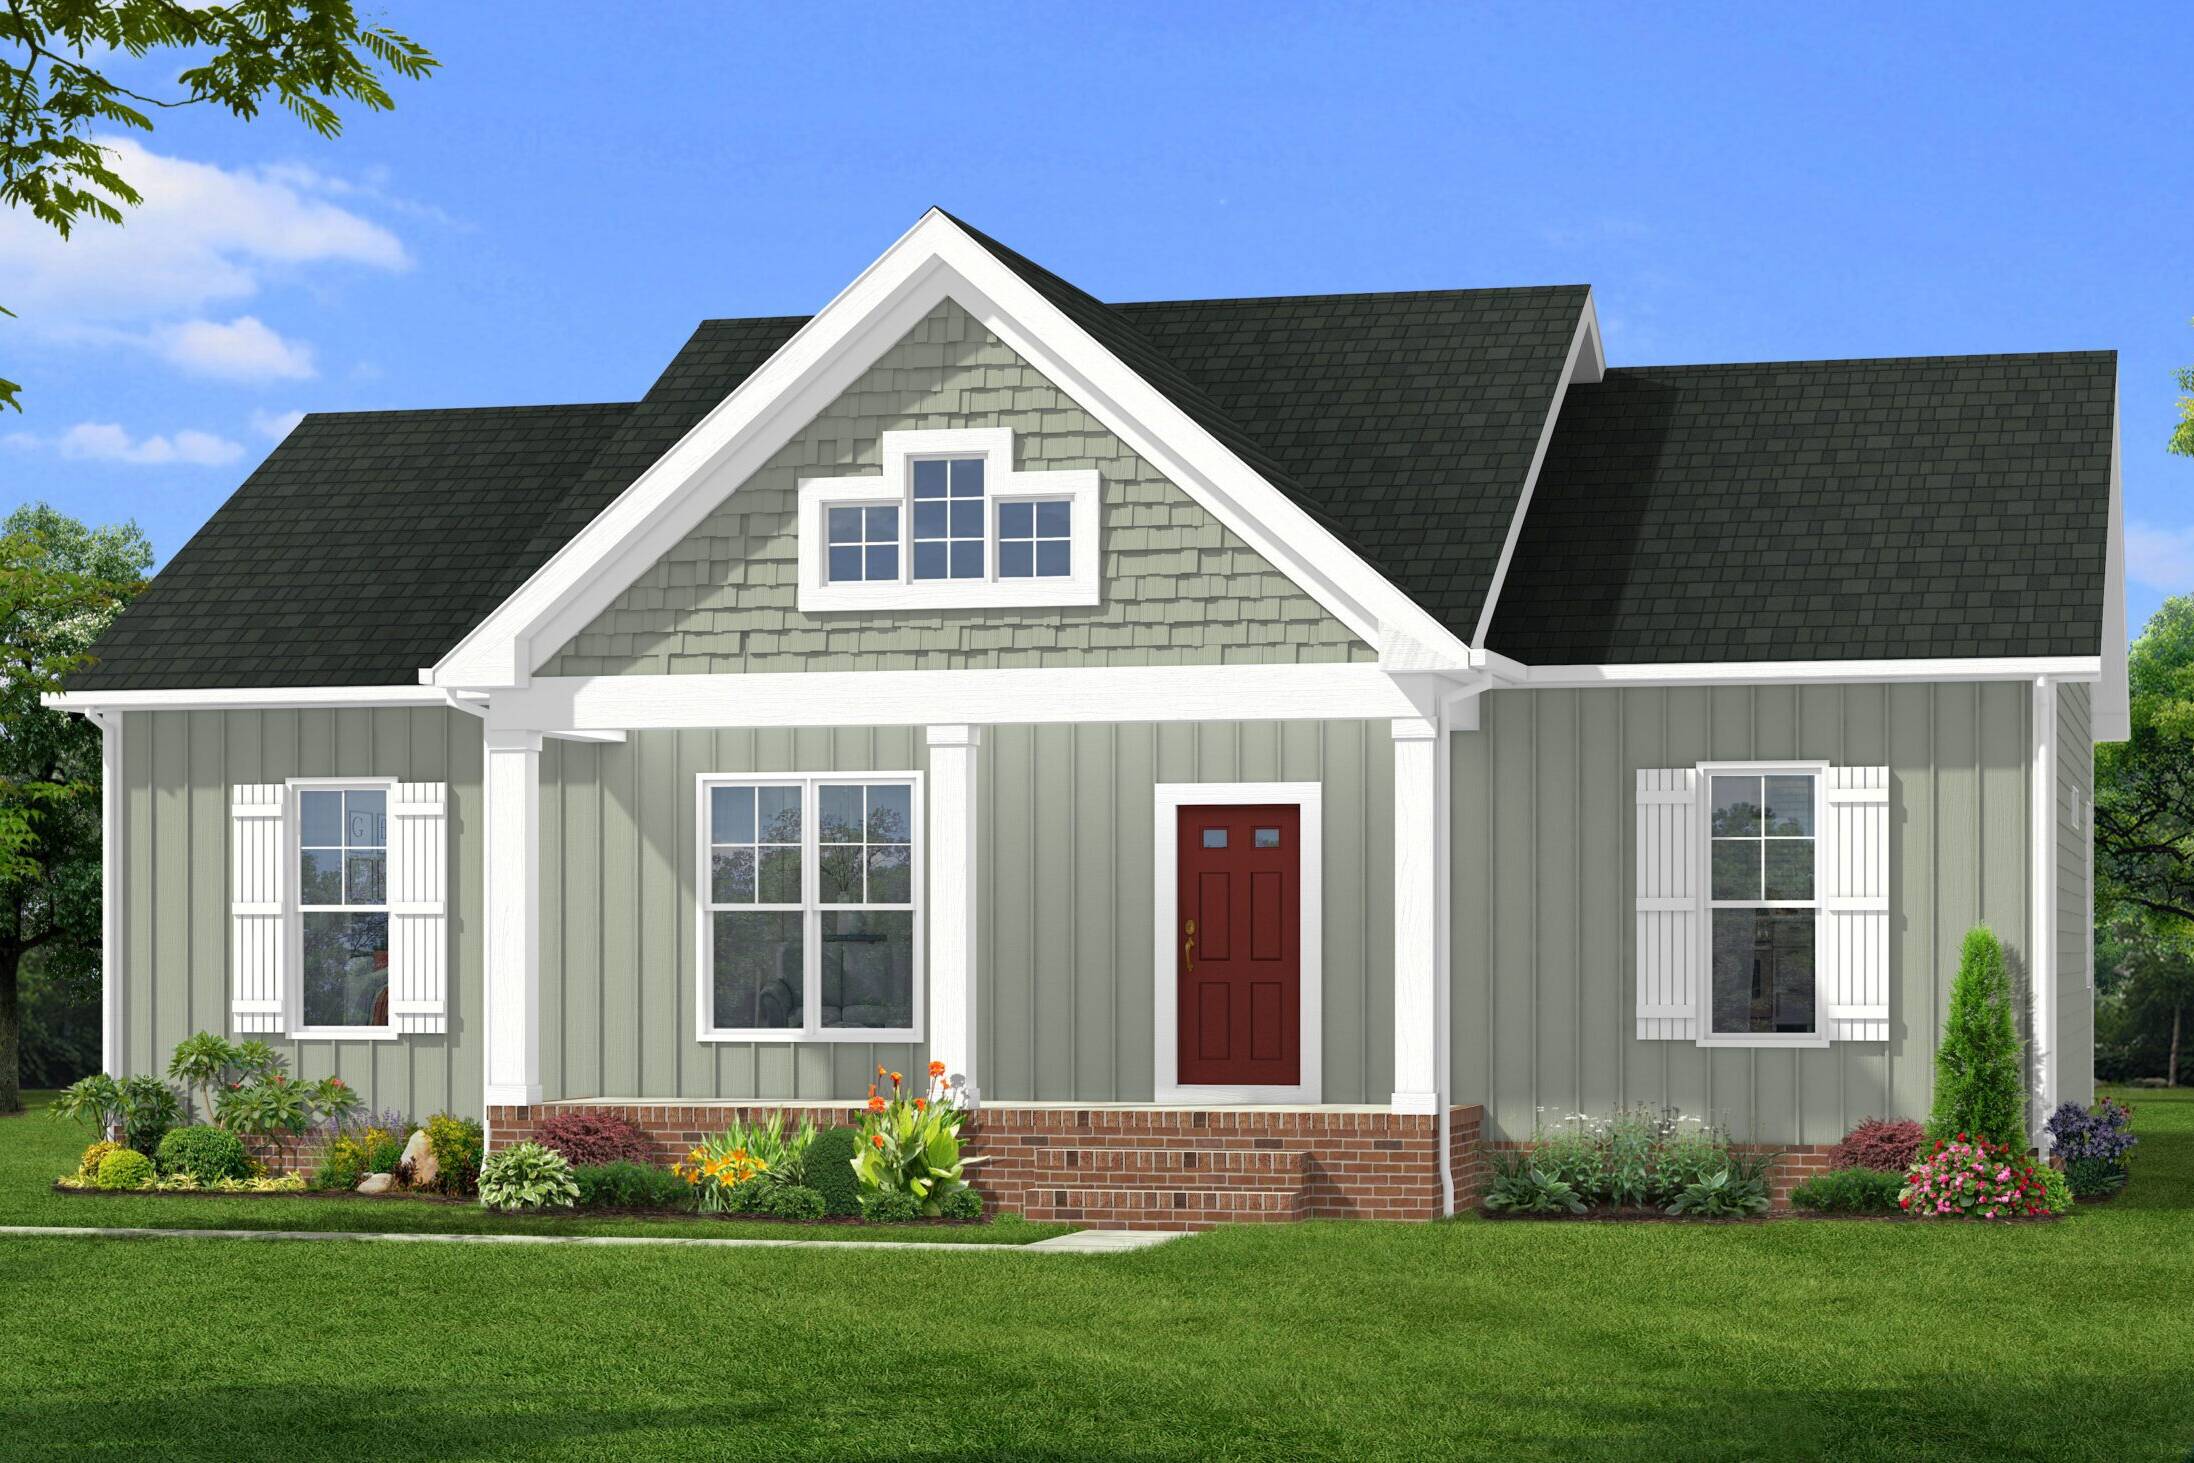 Exterior Rendering Beachcliff Lot 1 8.17.23 Scaled Uai 2194x1463, Rock River Homes